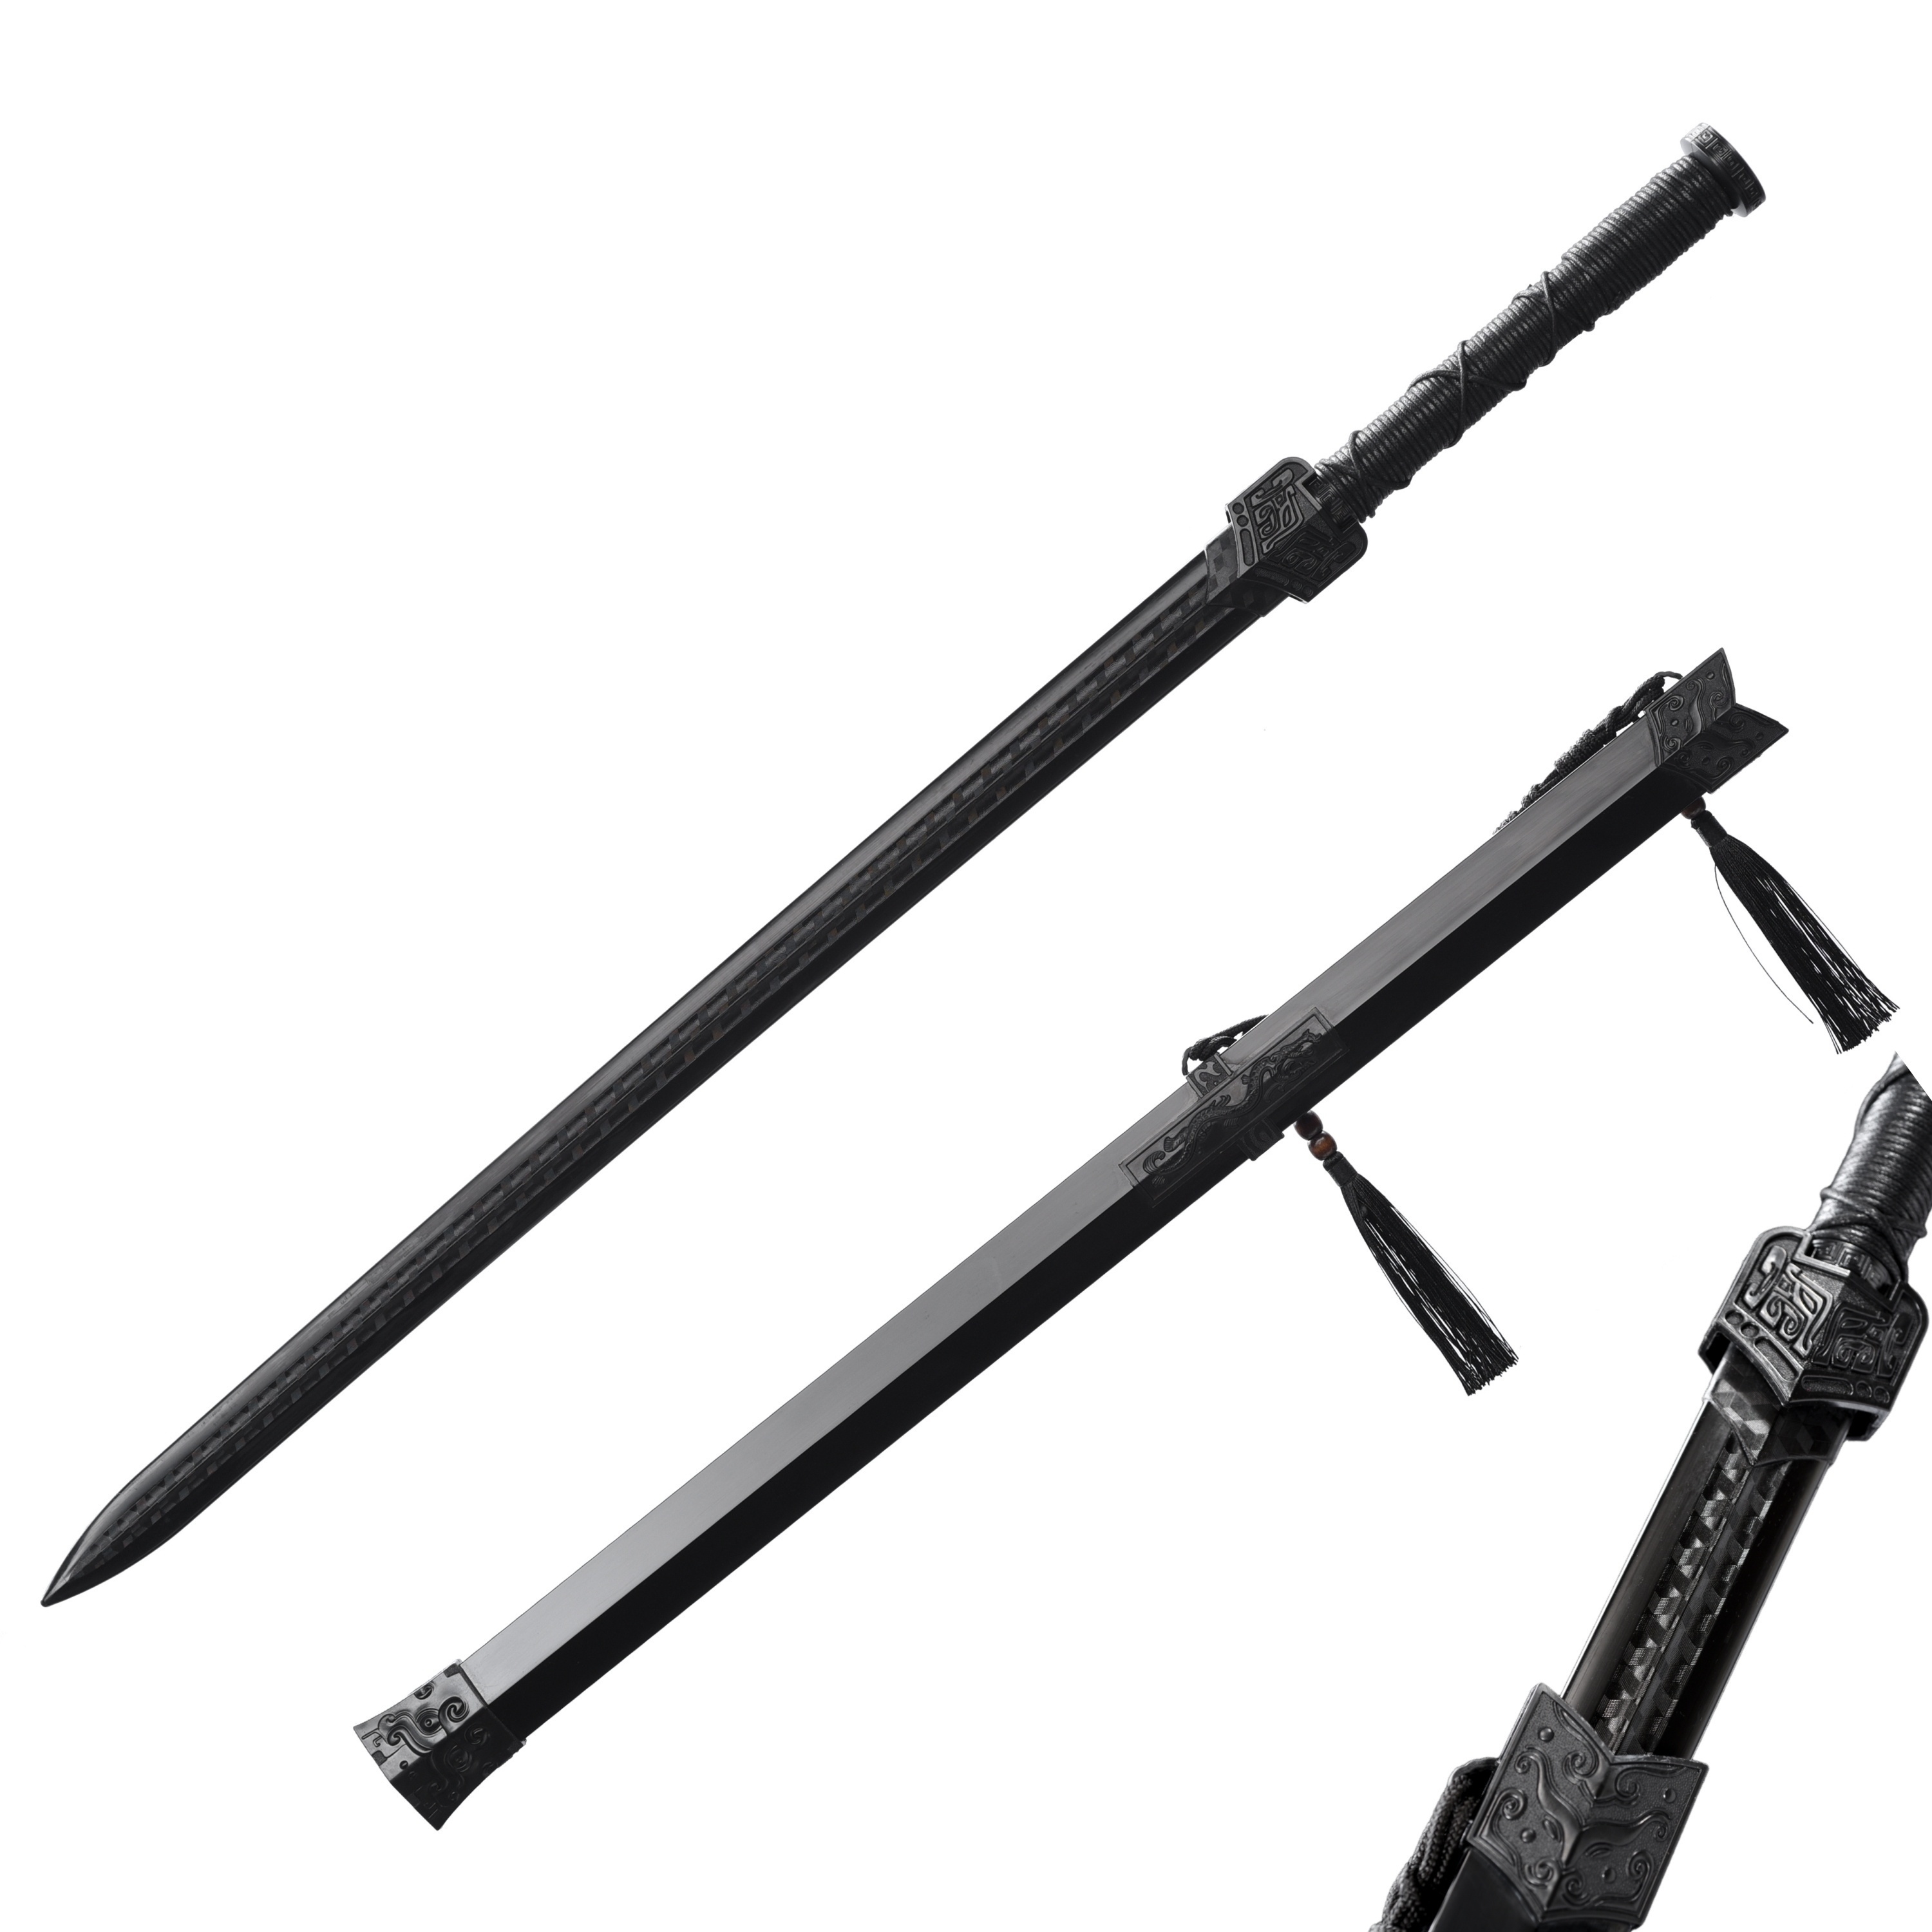 Chinese Tai-chi training sword, flexible stainless steel blade